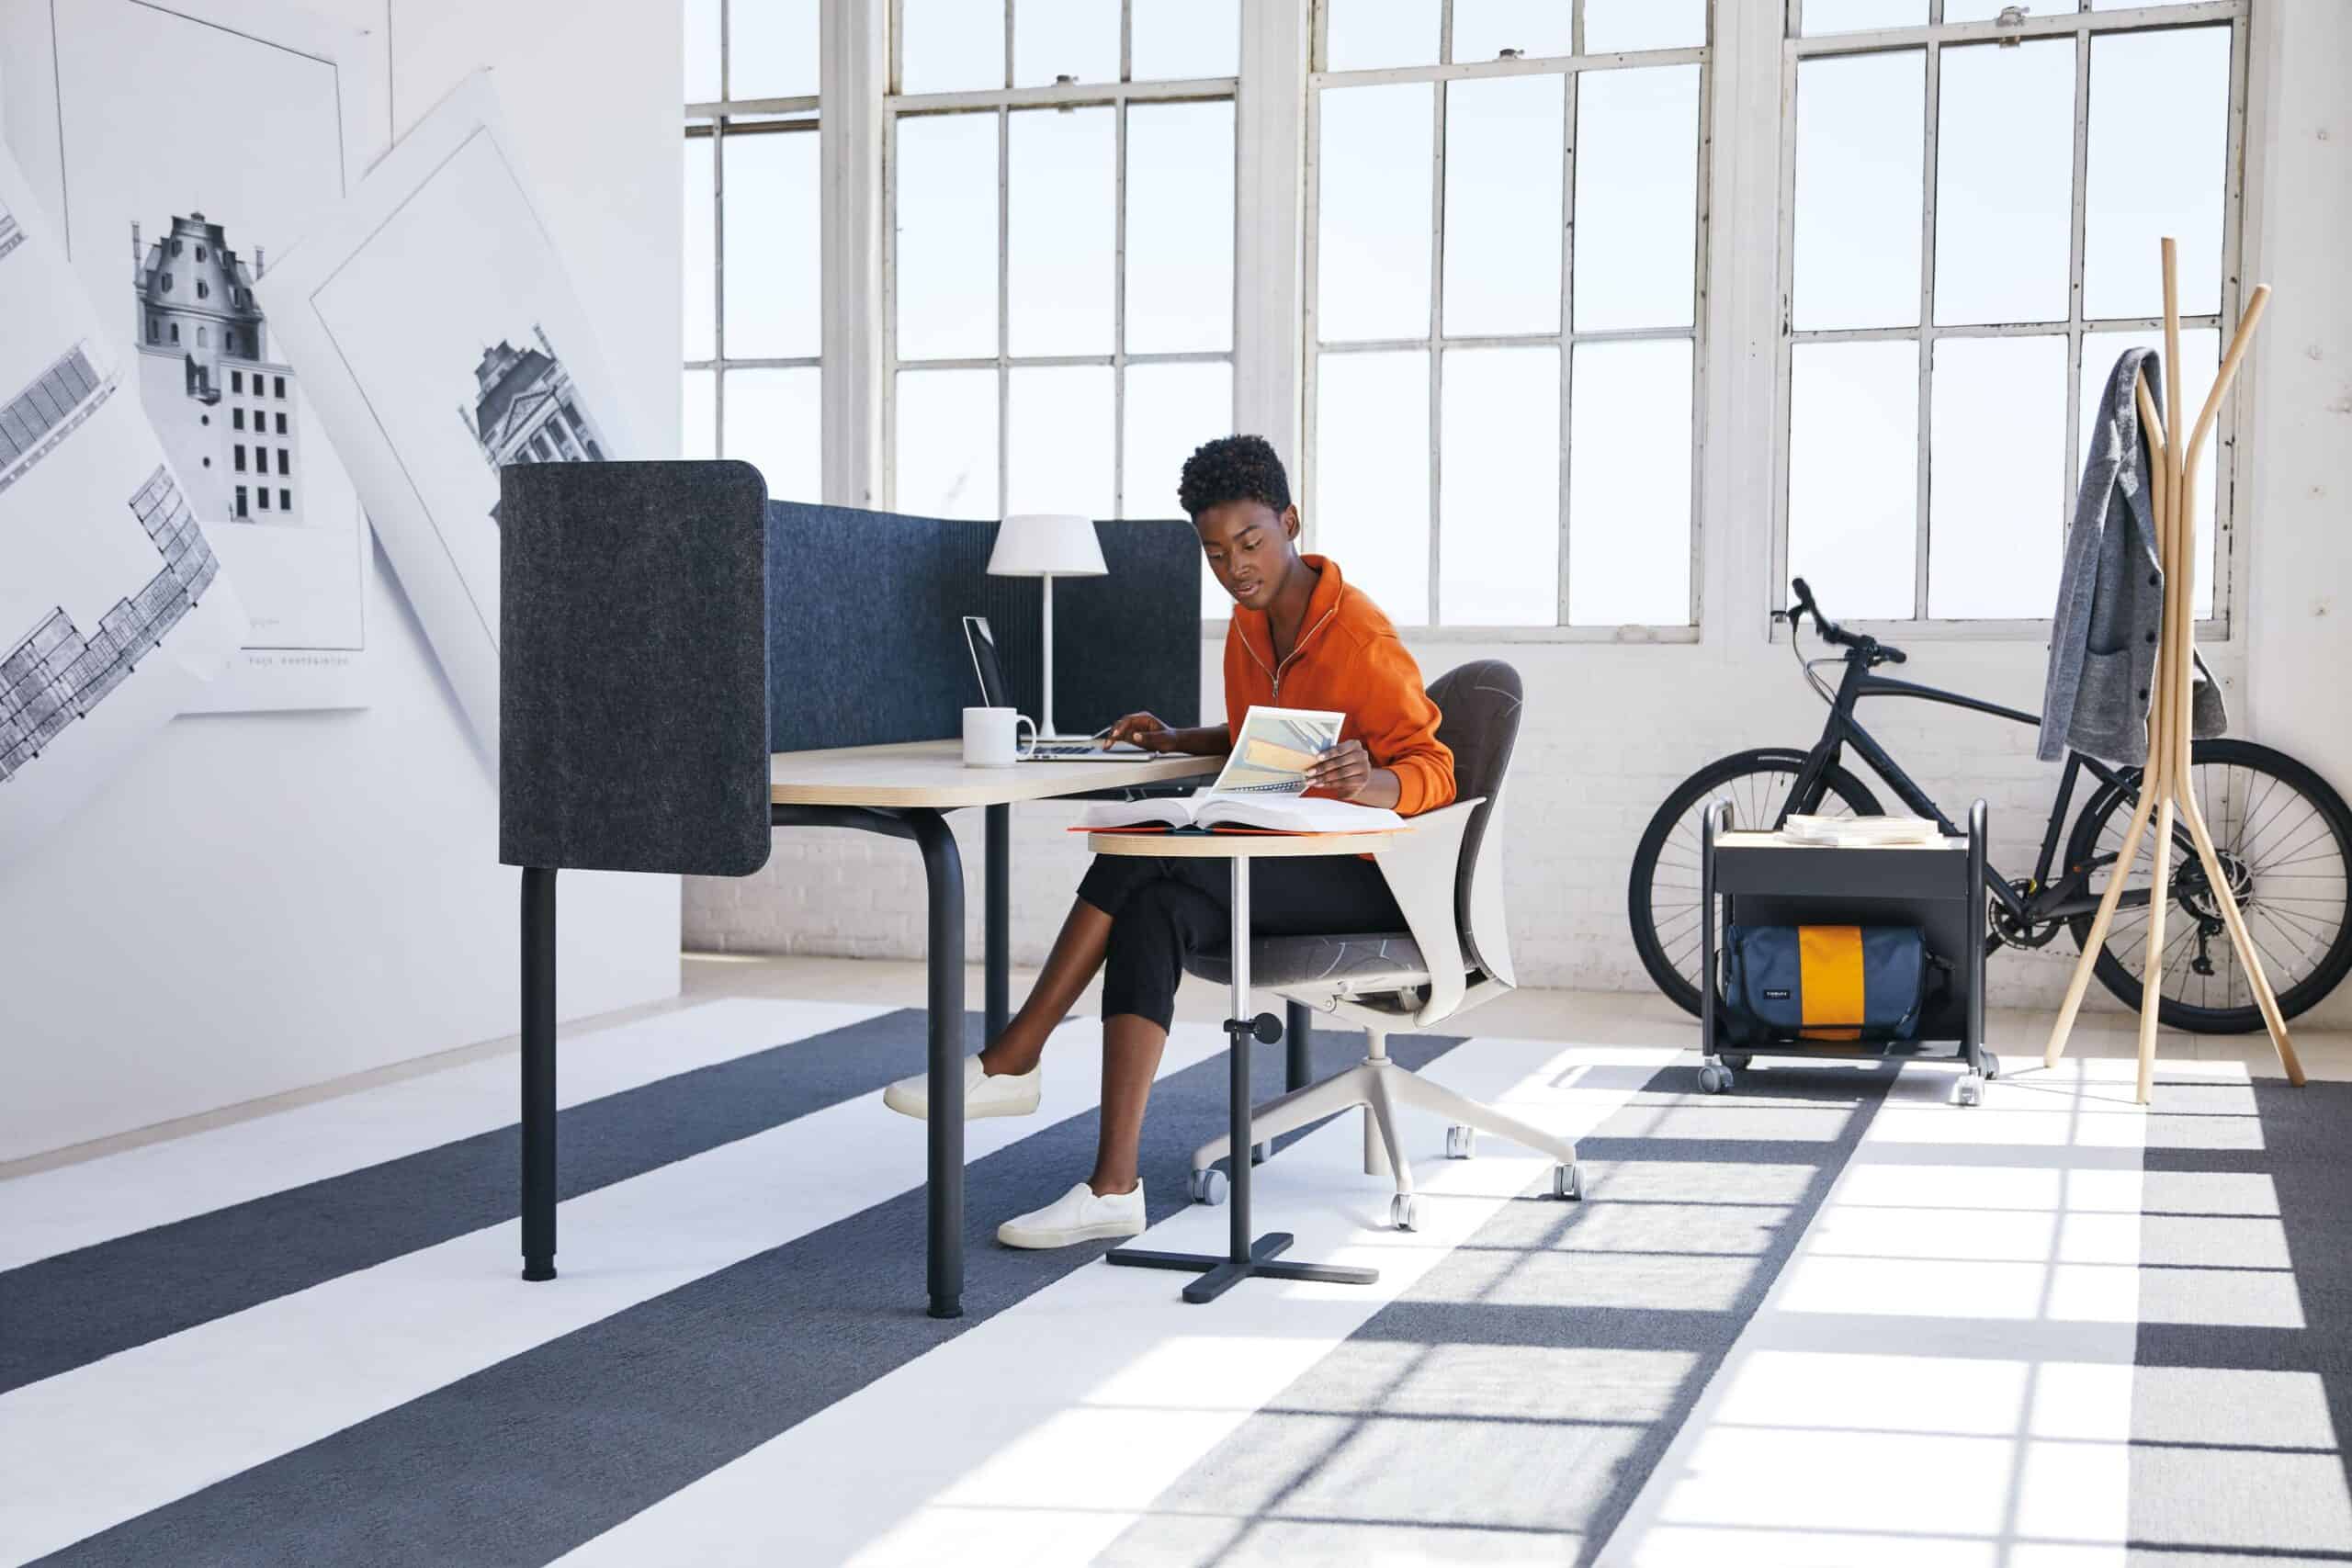 The Best Modular Workstations for Meeting Changing Workplace Needs